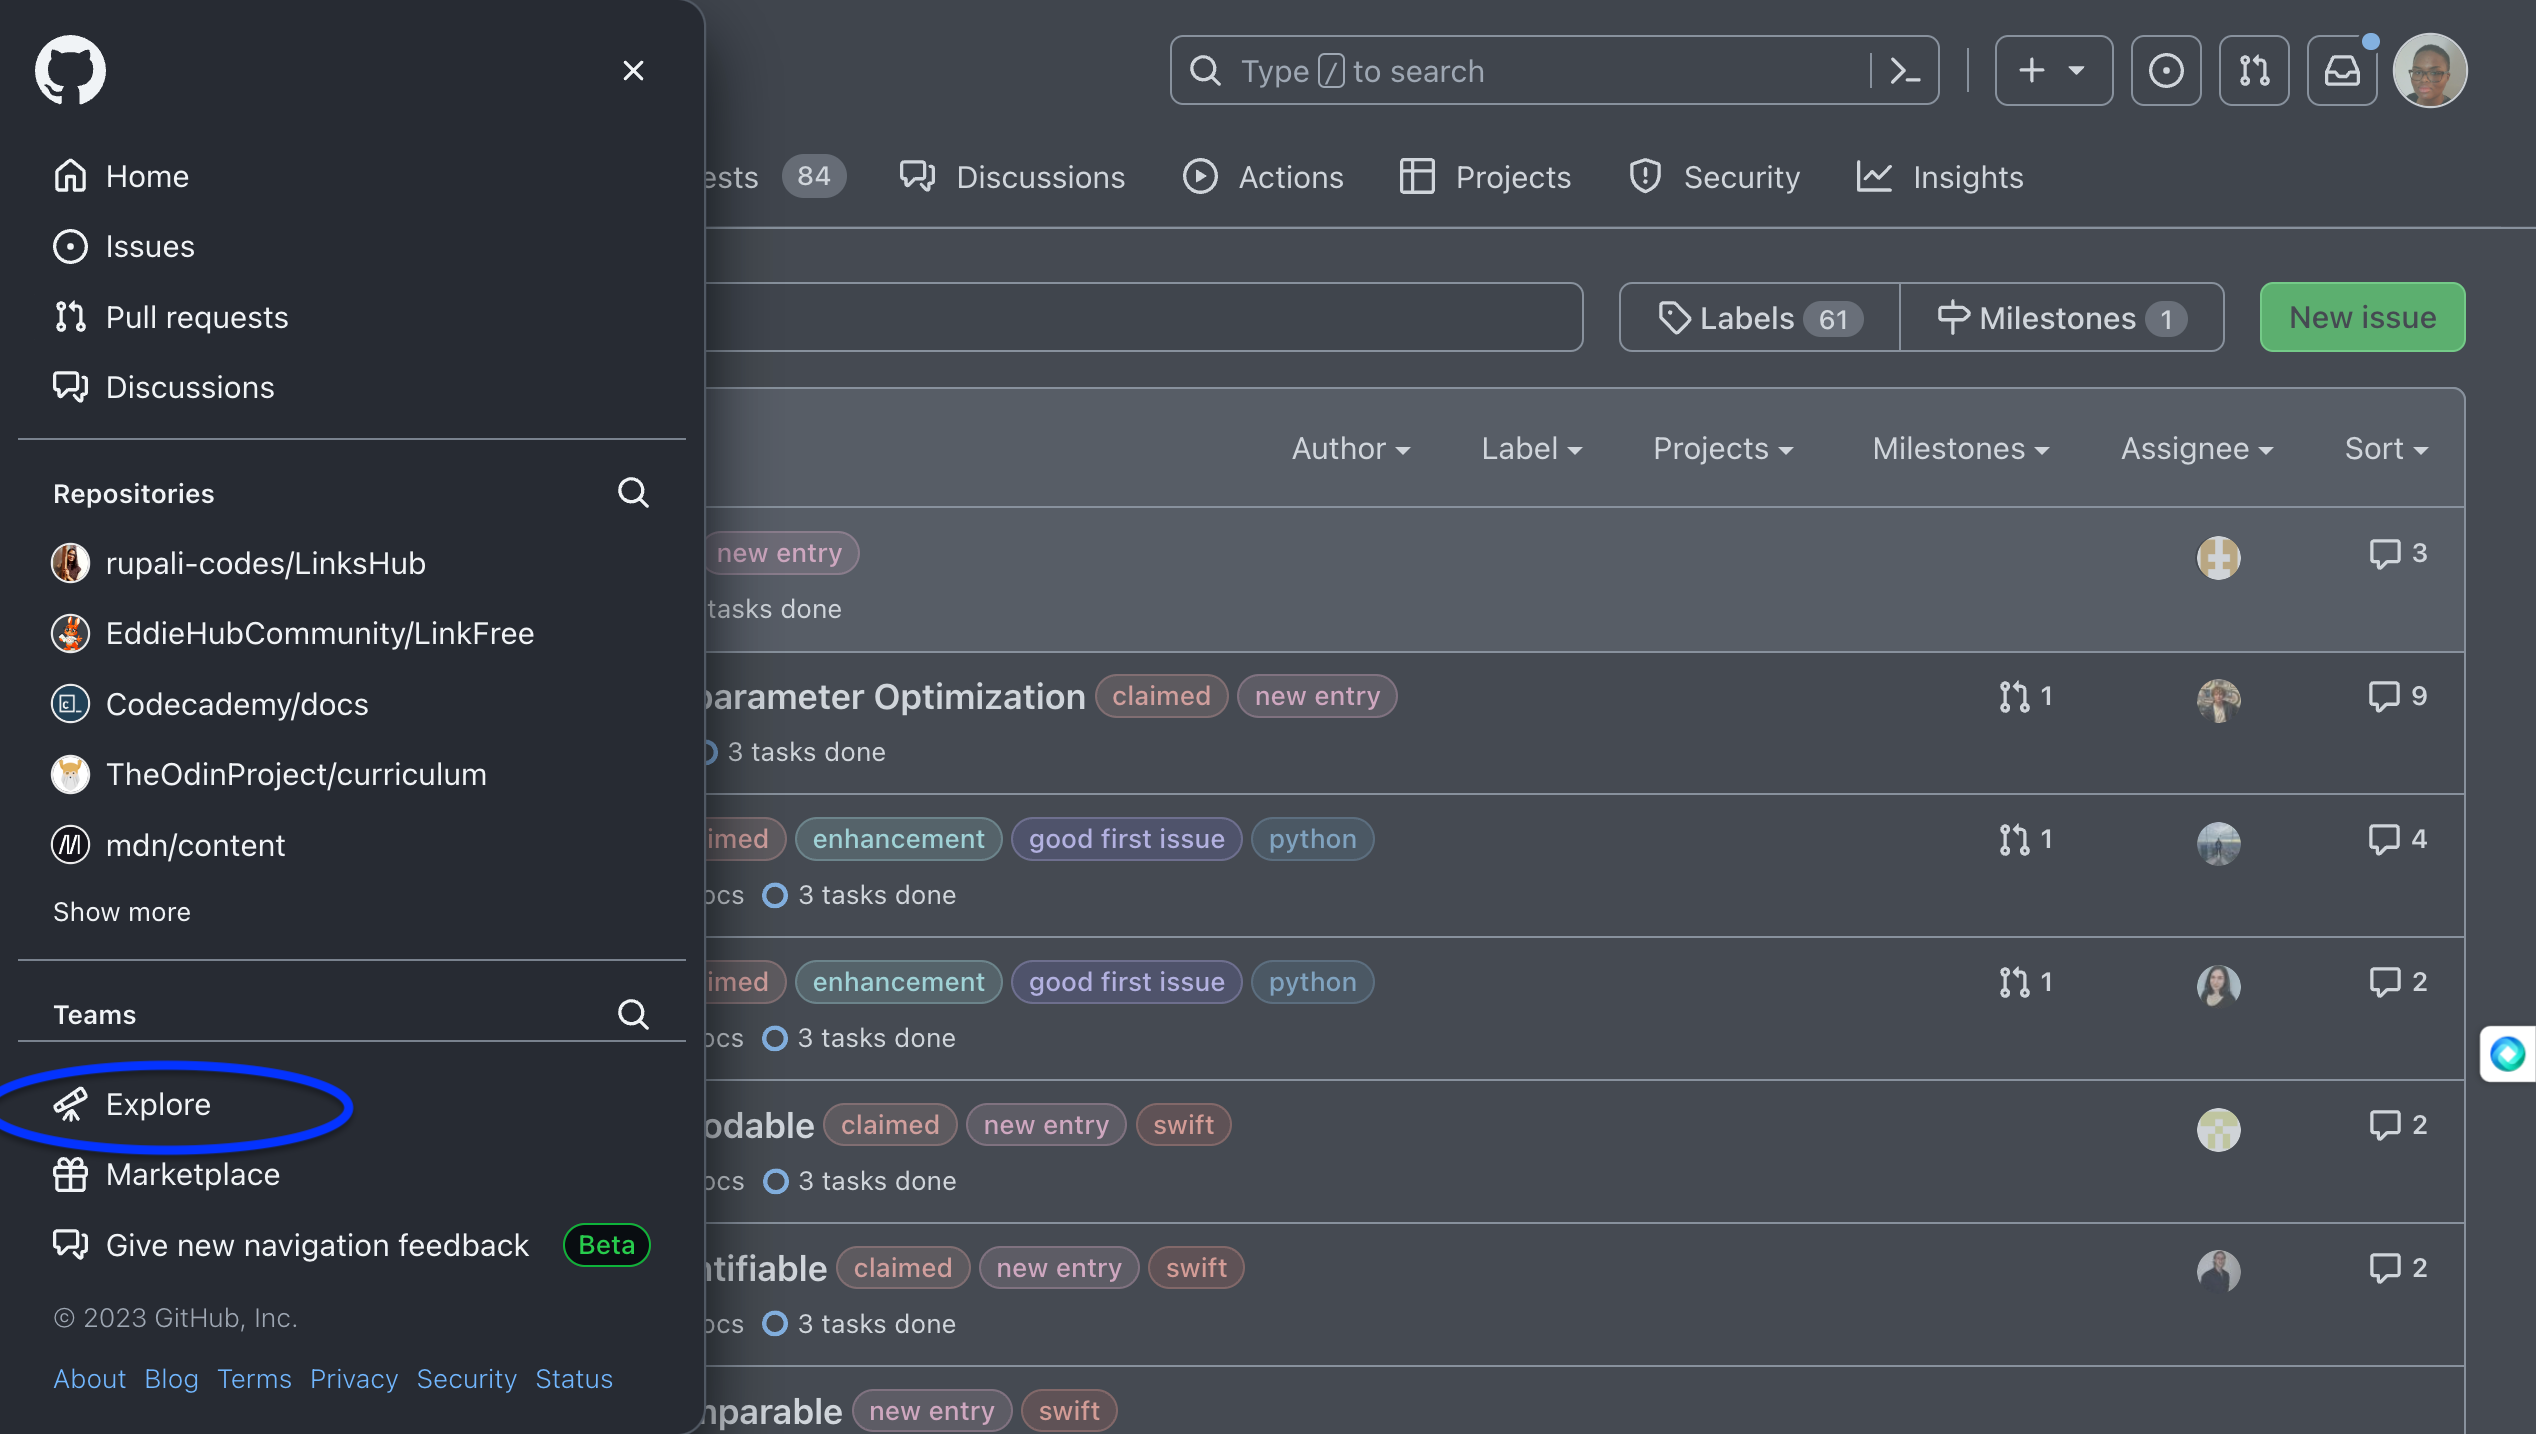 In this screenshot, you see the Github navigation bar with the Explore column being circled by a blue oval.